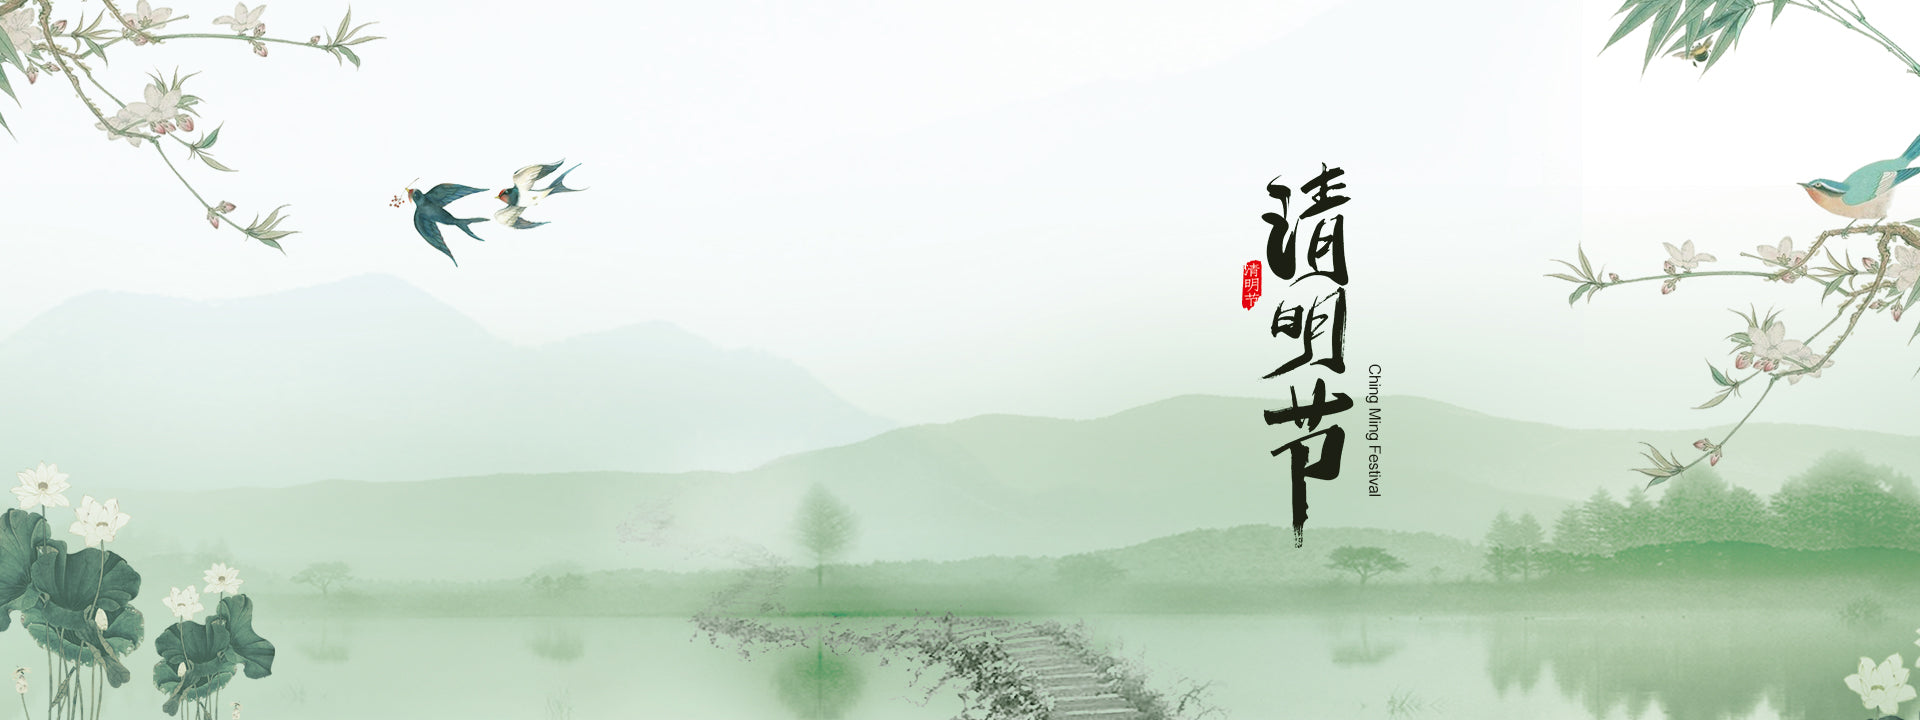 RayCue Qingming Festival 2021 Holiday Notice